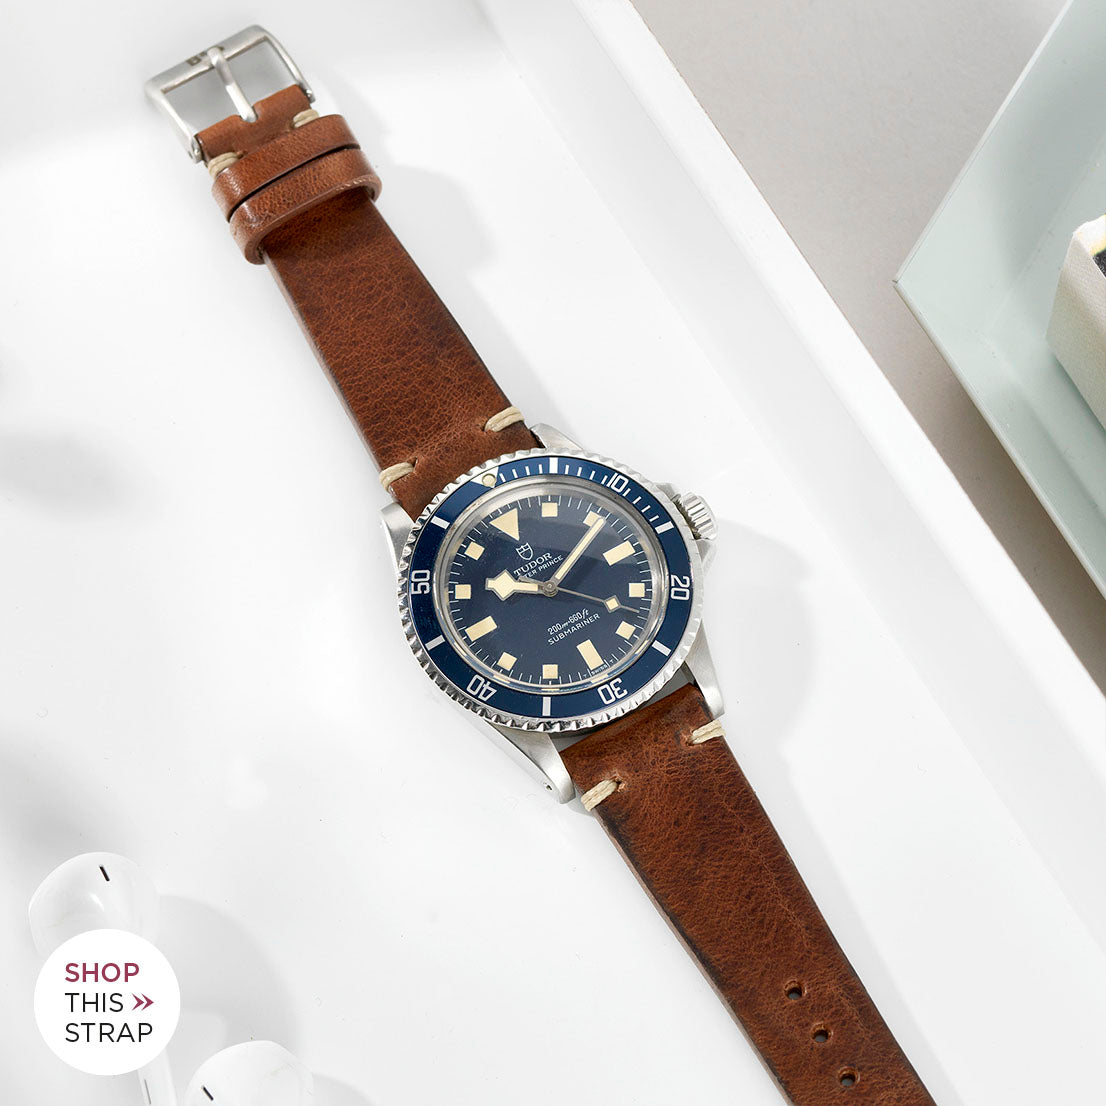 Bulang and Sons_Strap Guide_The Tudor Blue Snowflake_Siena Brown Leather Watch Strap